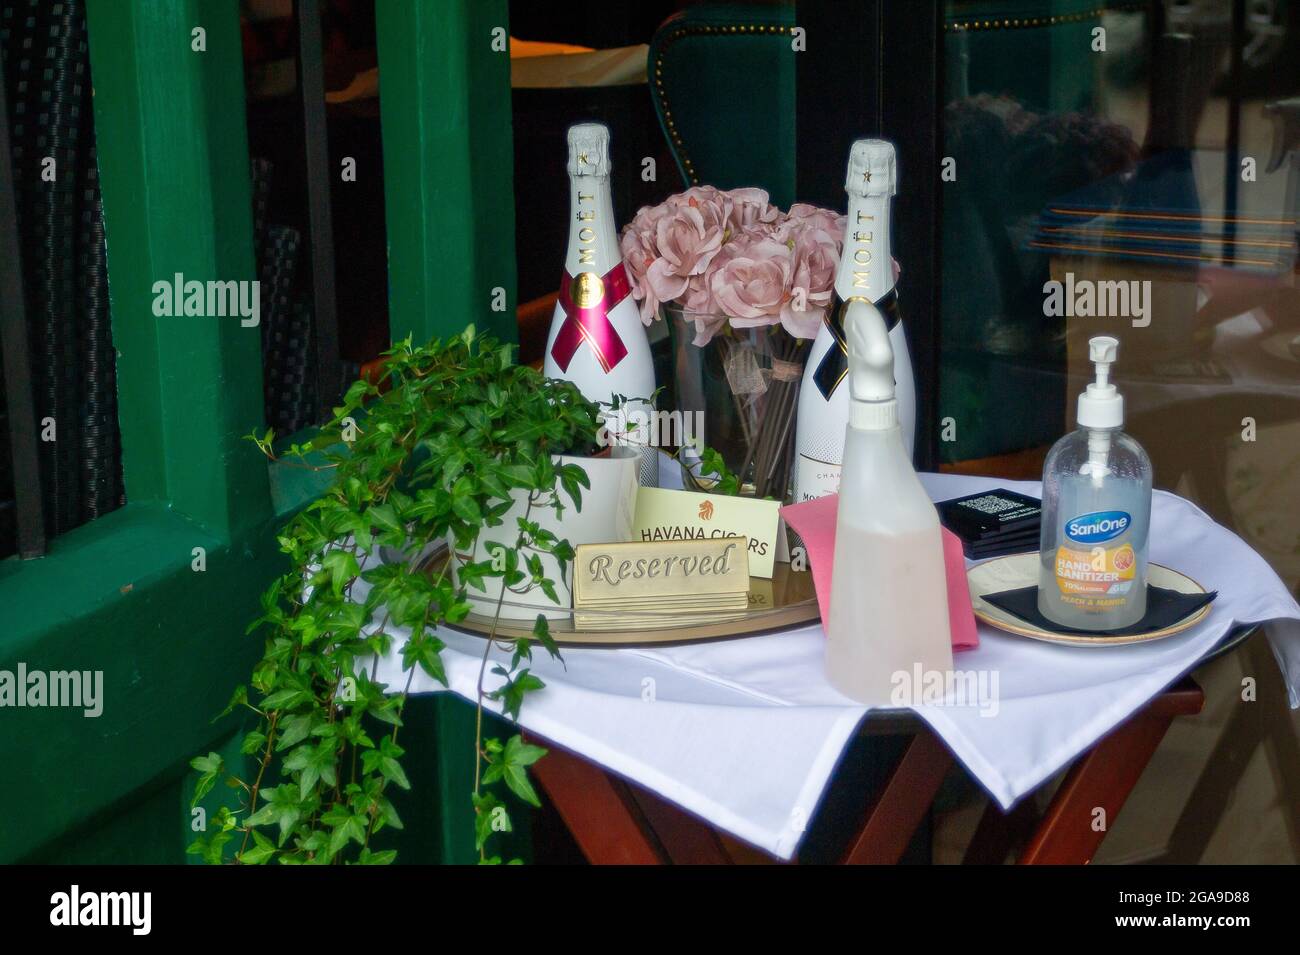 Berkhamsted, Hertfordshire, UK. 28th July, 2021. Champagne and hand sanitiser outside a restaurant. Credit: Maureen McLean/Alamy Stock Photo